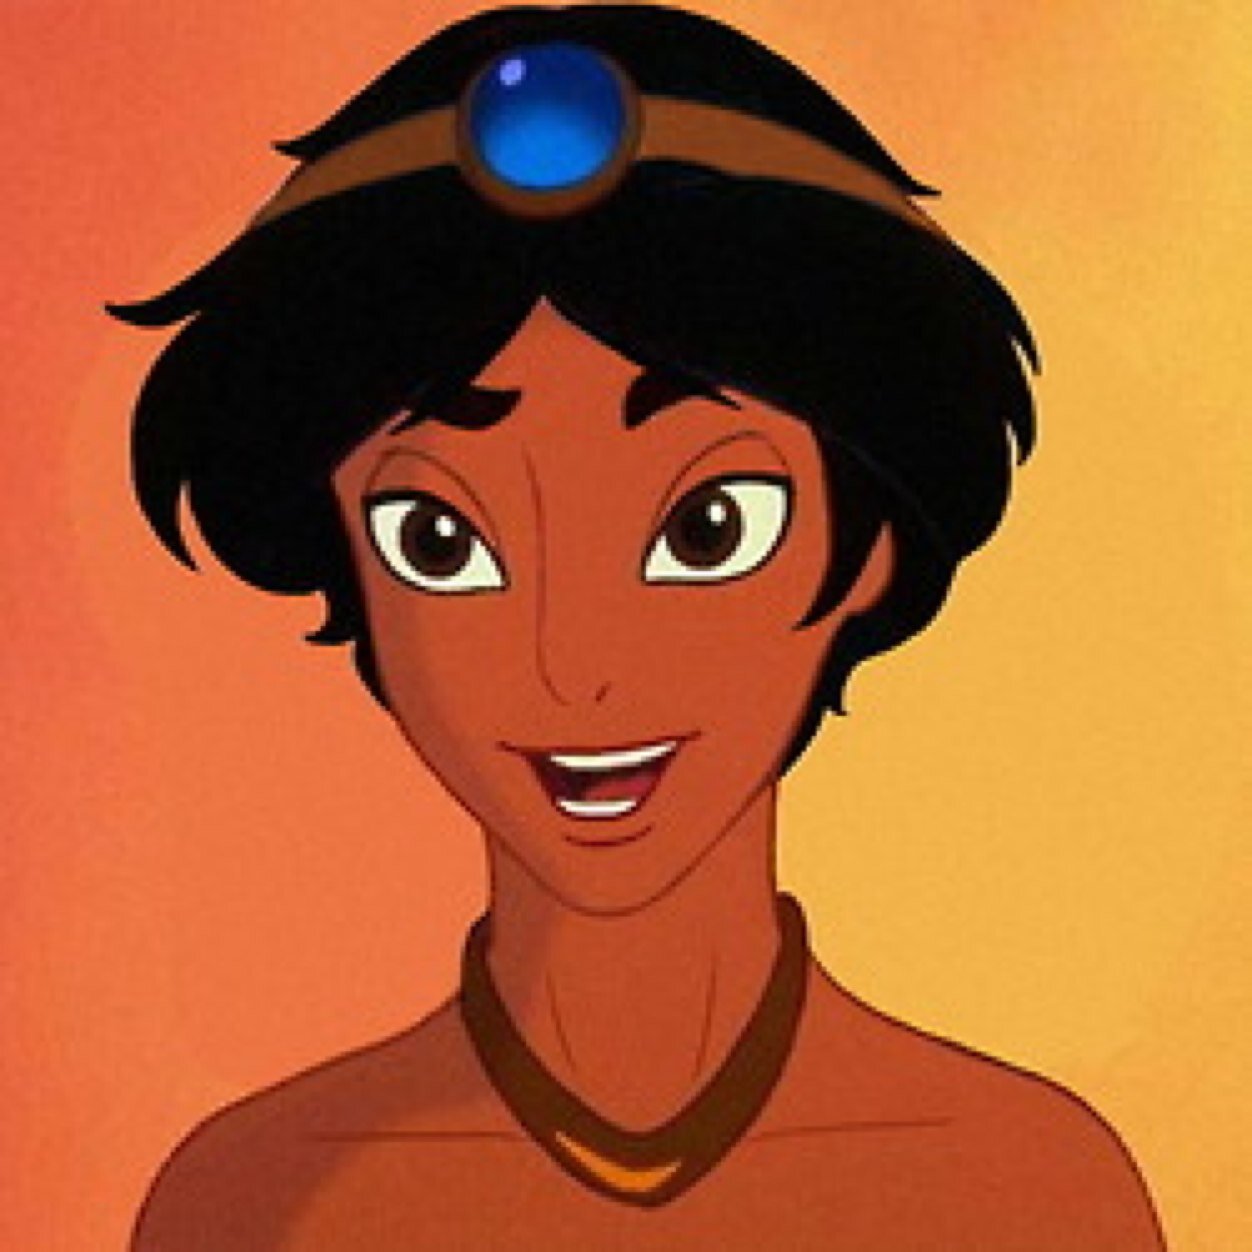 If only I had a life outside these palace walls! [#Aladdin #Genderbent.]